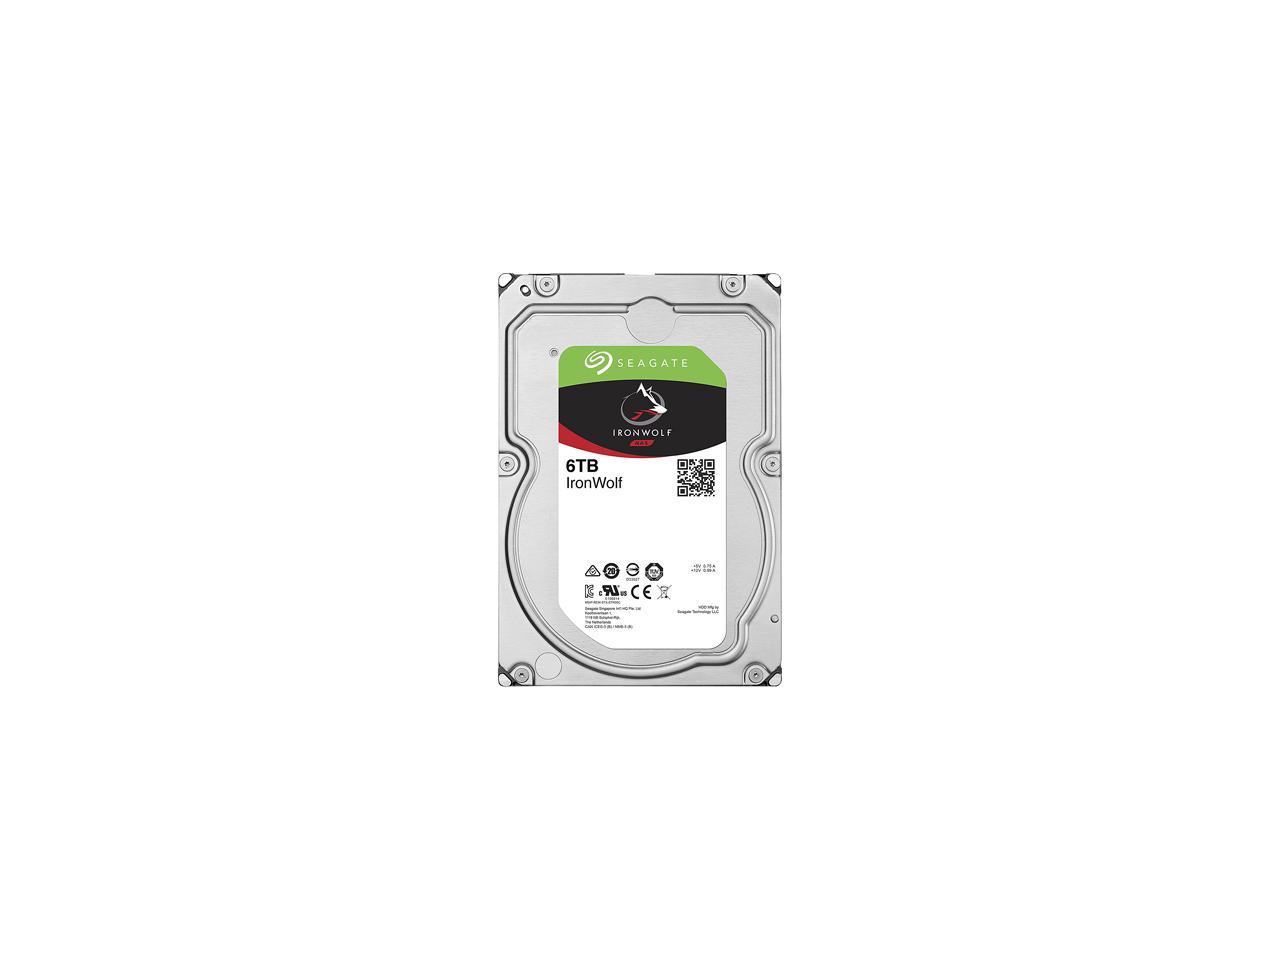 Seagate Ironwolf 6Tb Nas Hard Drive 7200 Rpm 256Mb Cache Sata 6.0Gb/S Cmr 3.5" Internal Hdd For Raid Network Attached Storage St6000Vn0033